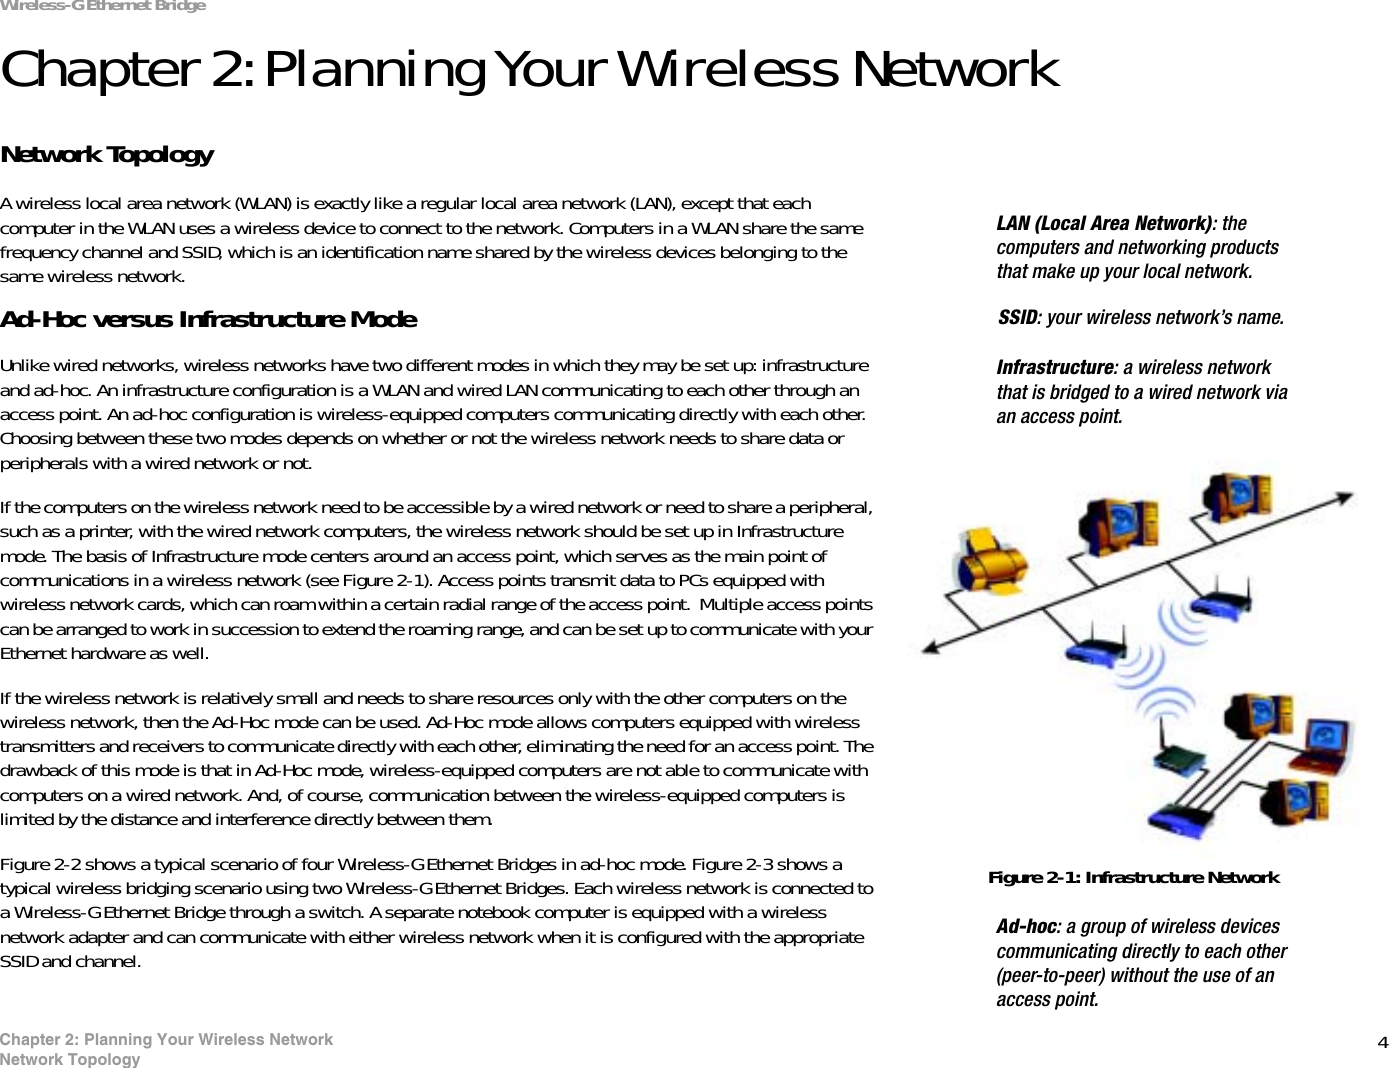 4Chapter 2: Planning Your Wireless NetworkNetwork TopologyWireless-G Ethernet BridgeChapter 2: Planning Your Wireless NetworkNetwork TopologyA wireless local area network (WLAN) is exactly like a regular local area network (LAN), except that each computer in the WLAN uses a wireless device to connect to the network. Computers in a WLAN share the same frequency channel and SSID, which is an identification name shared by the wireless devices belonging to the same wireless network.Ad-Hoc versus Infrastructure ModeUnlike wired networks, wireless networks have two different modes in which they may be set up: infrastructure and ad-hoc. An infrastructure configuration is a WLAN and wired LAN communicating to each other through an access point. An ad-hoc configuration is wireless-equipped computers communicating directly with each other. Choosing between these two modes depends on whether or not the wireless network needs to share data or peripherals with a wired network or not. If the computers on the wireless network need to be accessible by a wired network or need to share a peripheral, such as a printer, with the wired network computers, the wireless network should be set up in Infrastructure mode. The basis of Infrastructure mode centers around an access point, which serves as the main point of communications in a wireless network (see Figure 2-1). Access points transmit data to PCs equipped with wireless network cards, which can roam within a certain radial range of the access point.  Multiple access points can be arranged to work in succession to extend the roaming range, and can be set up to communicate with your Ethernet hardware as well. If the wireless network is relatively small and needs to share resources only with the other computers on the wireless network, then the Ad-Hoc mode can be used. Ad-Hoc mode allows computers equipped with wireless transmitters and receivers to communicate directly with each other, eliminating the need for an access point. The drawback of this mode is that in Ad-Hoc mode, wireless-equipped computers are not able to communicate with computers on a wired network. And, of course, communication between the wireless-equipped computers is limited by the distance and interference directly between them. Figure 2-2 shows a typical scenario of four Wireless-G Ethernet Bridges in ad-hoc mode. Figure 2-3 shows a typical wireless bridging scenario using two Wireless-G Ethernet Bridges. Each wireless network is connected to a Wireless-G Ethernet Bridge through a switch. A separate notebook computer is equipped with a wireless network adapter and can communicate with either wireless network when it is configured with the appropriate SSID and channel.SSID: your wireless network’s name.LAN (Local Area Network): the computers and networking products that make up your local network.Figure 2-1: Infrastructure NetworkInfrastructure: a wireless network that is bridged to a wired network via an access point.Ad-hoc: a group of wireless devices communicating directly to each other (peer-to-peer) without the use of an access point.